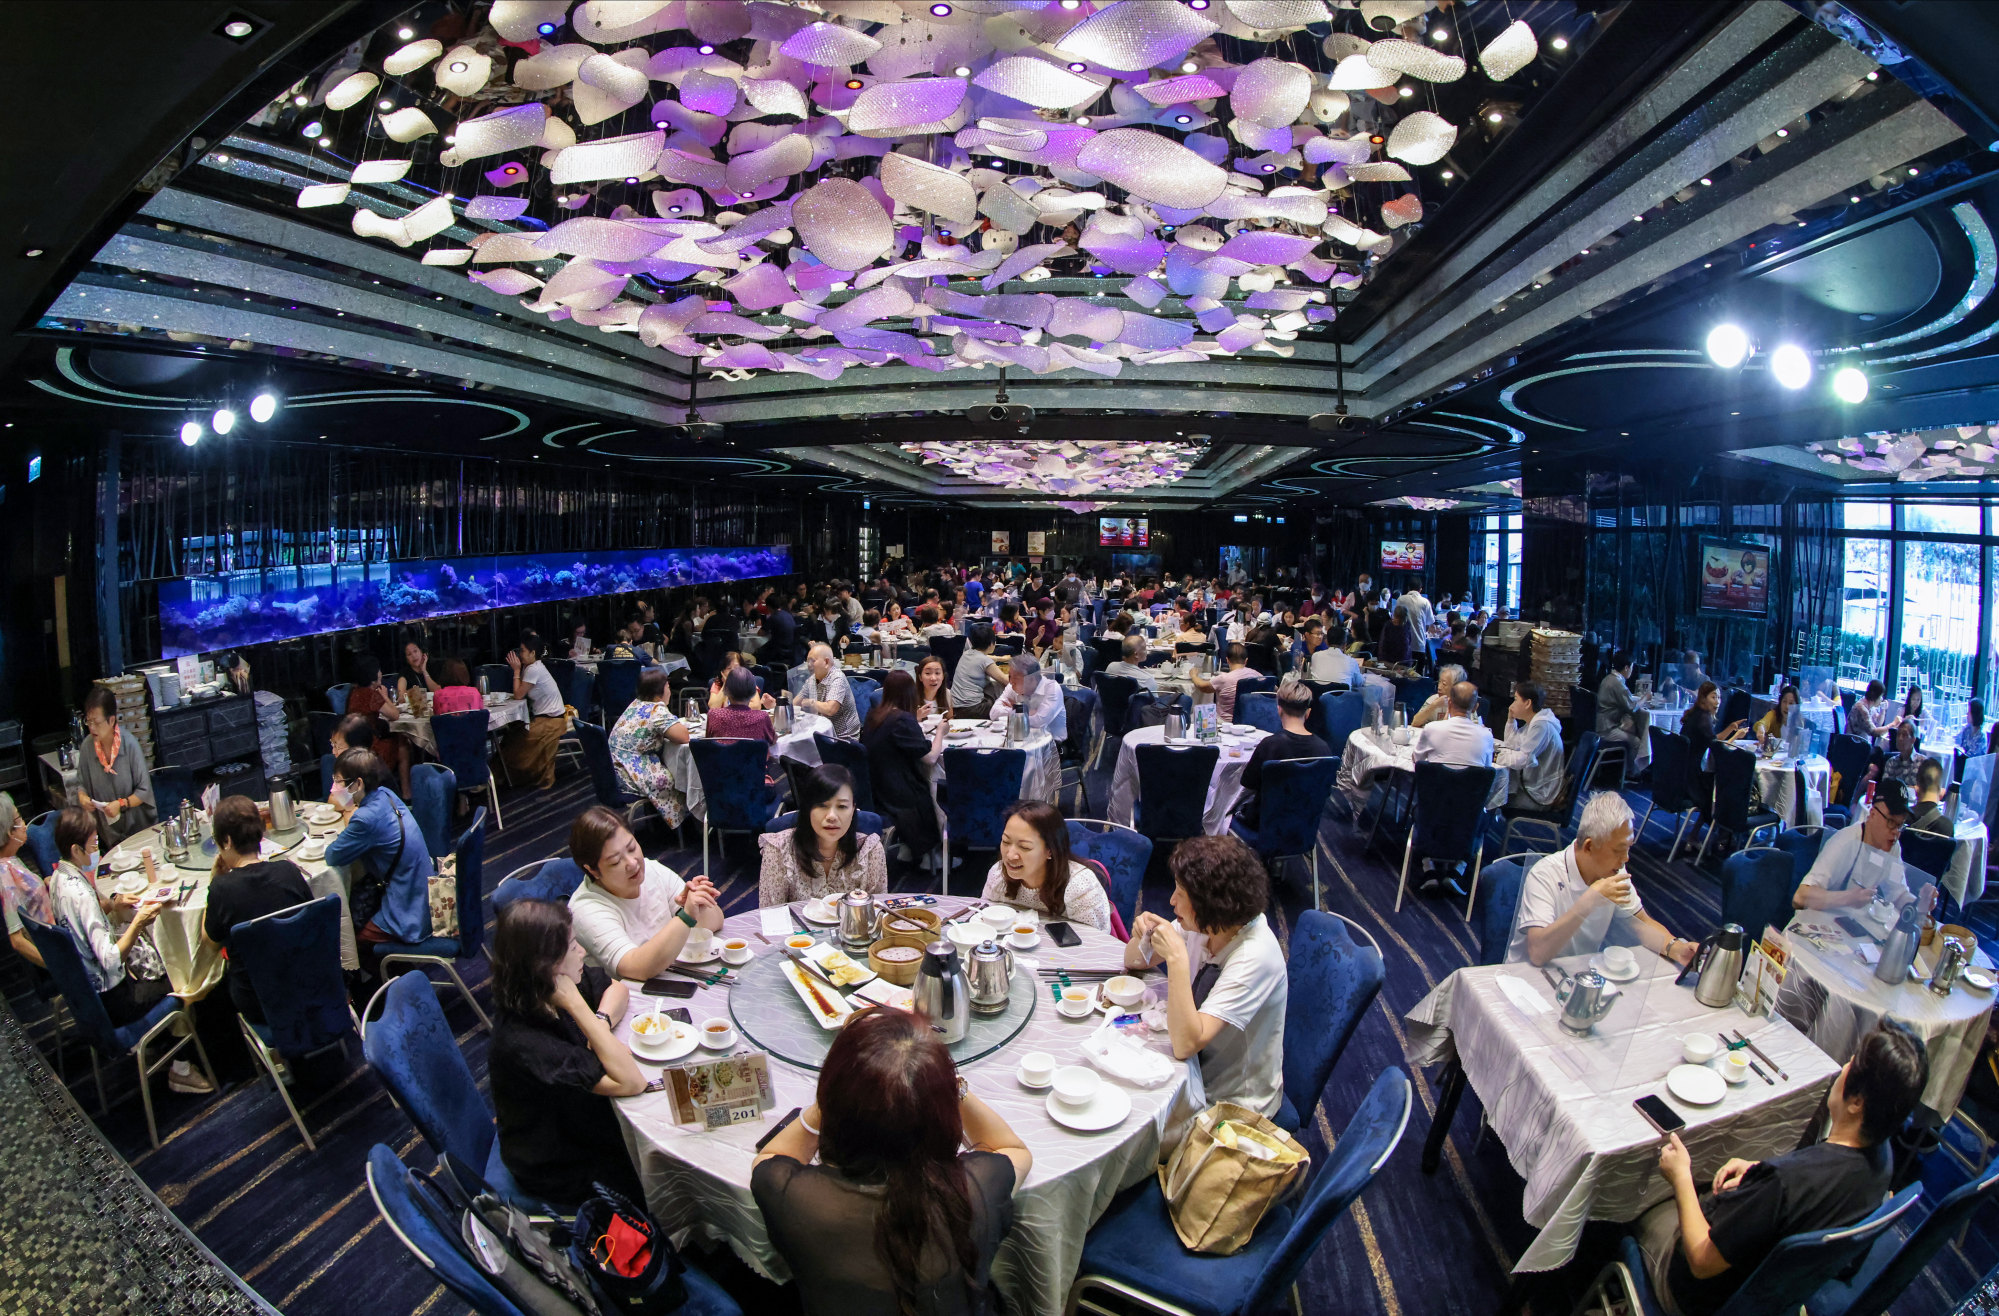 Diners have lunch at U-Banquet - The Starview restaurant in Kwun Tong. Photo: Dickson Lee